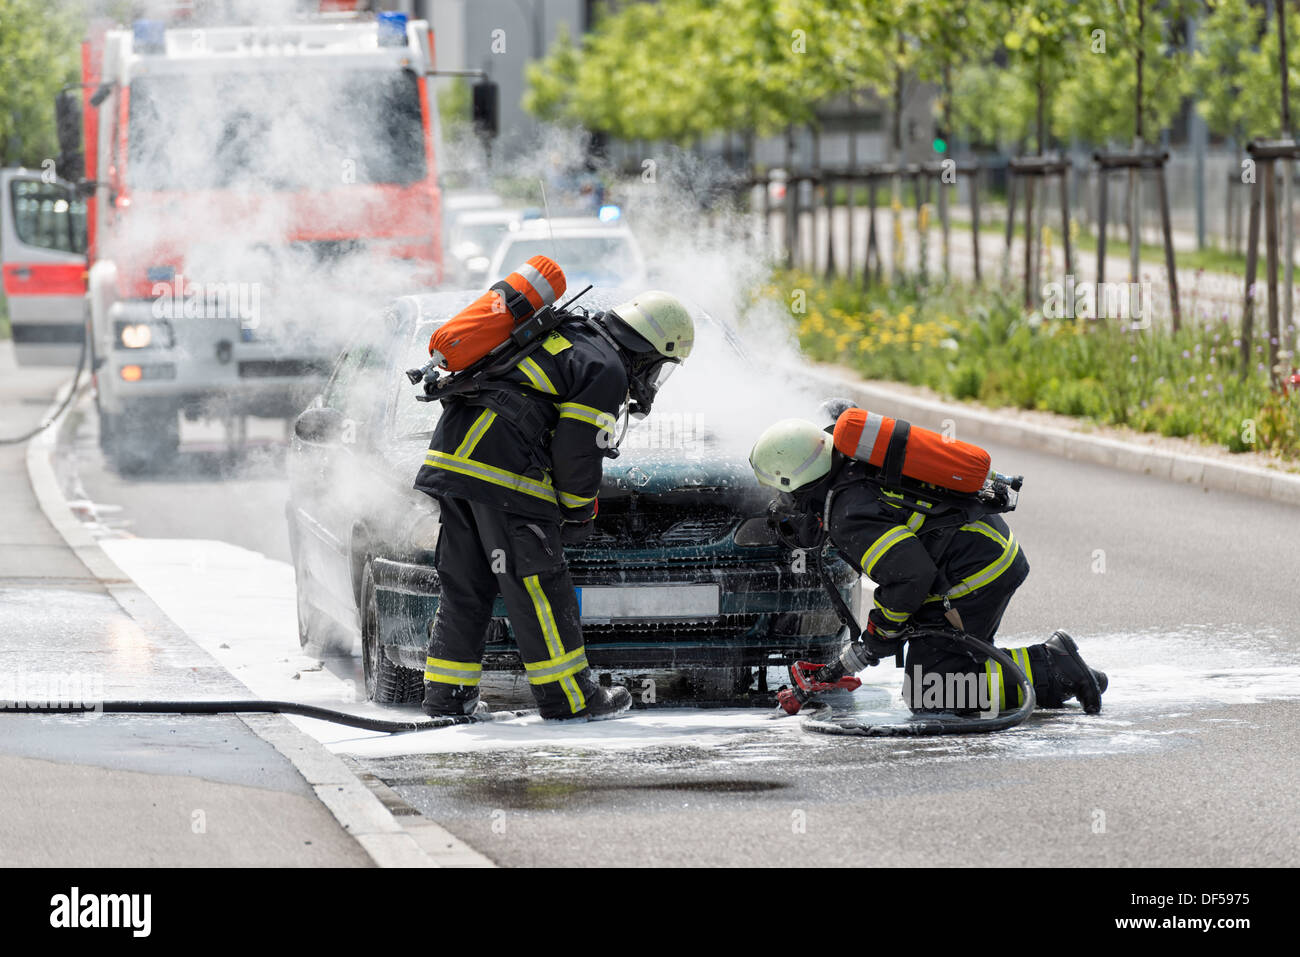 Burning motor vehicle been put out by firemen in protective clothing Stock Photo